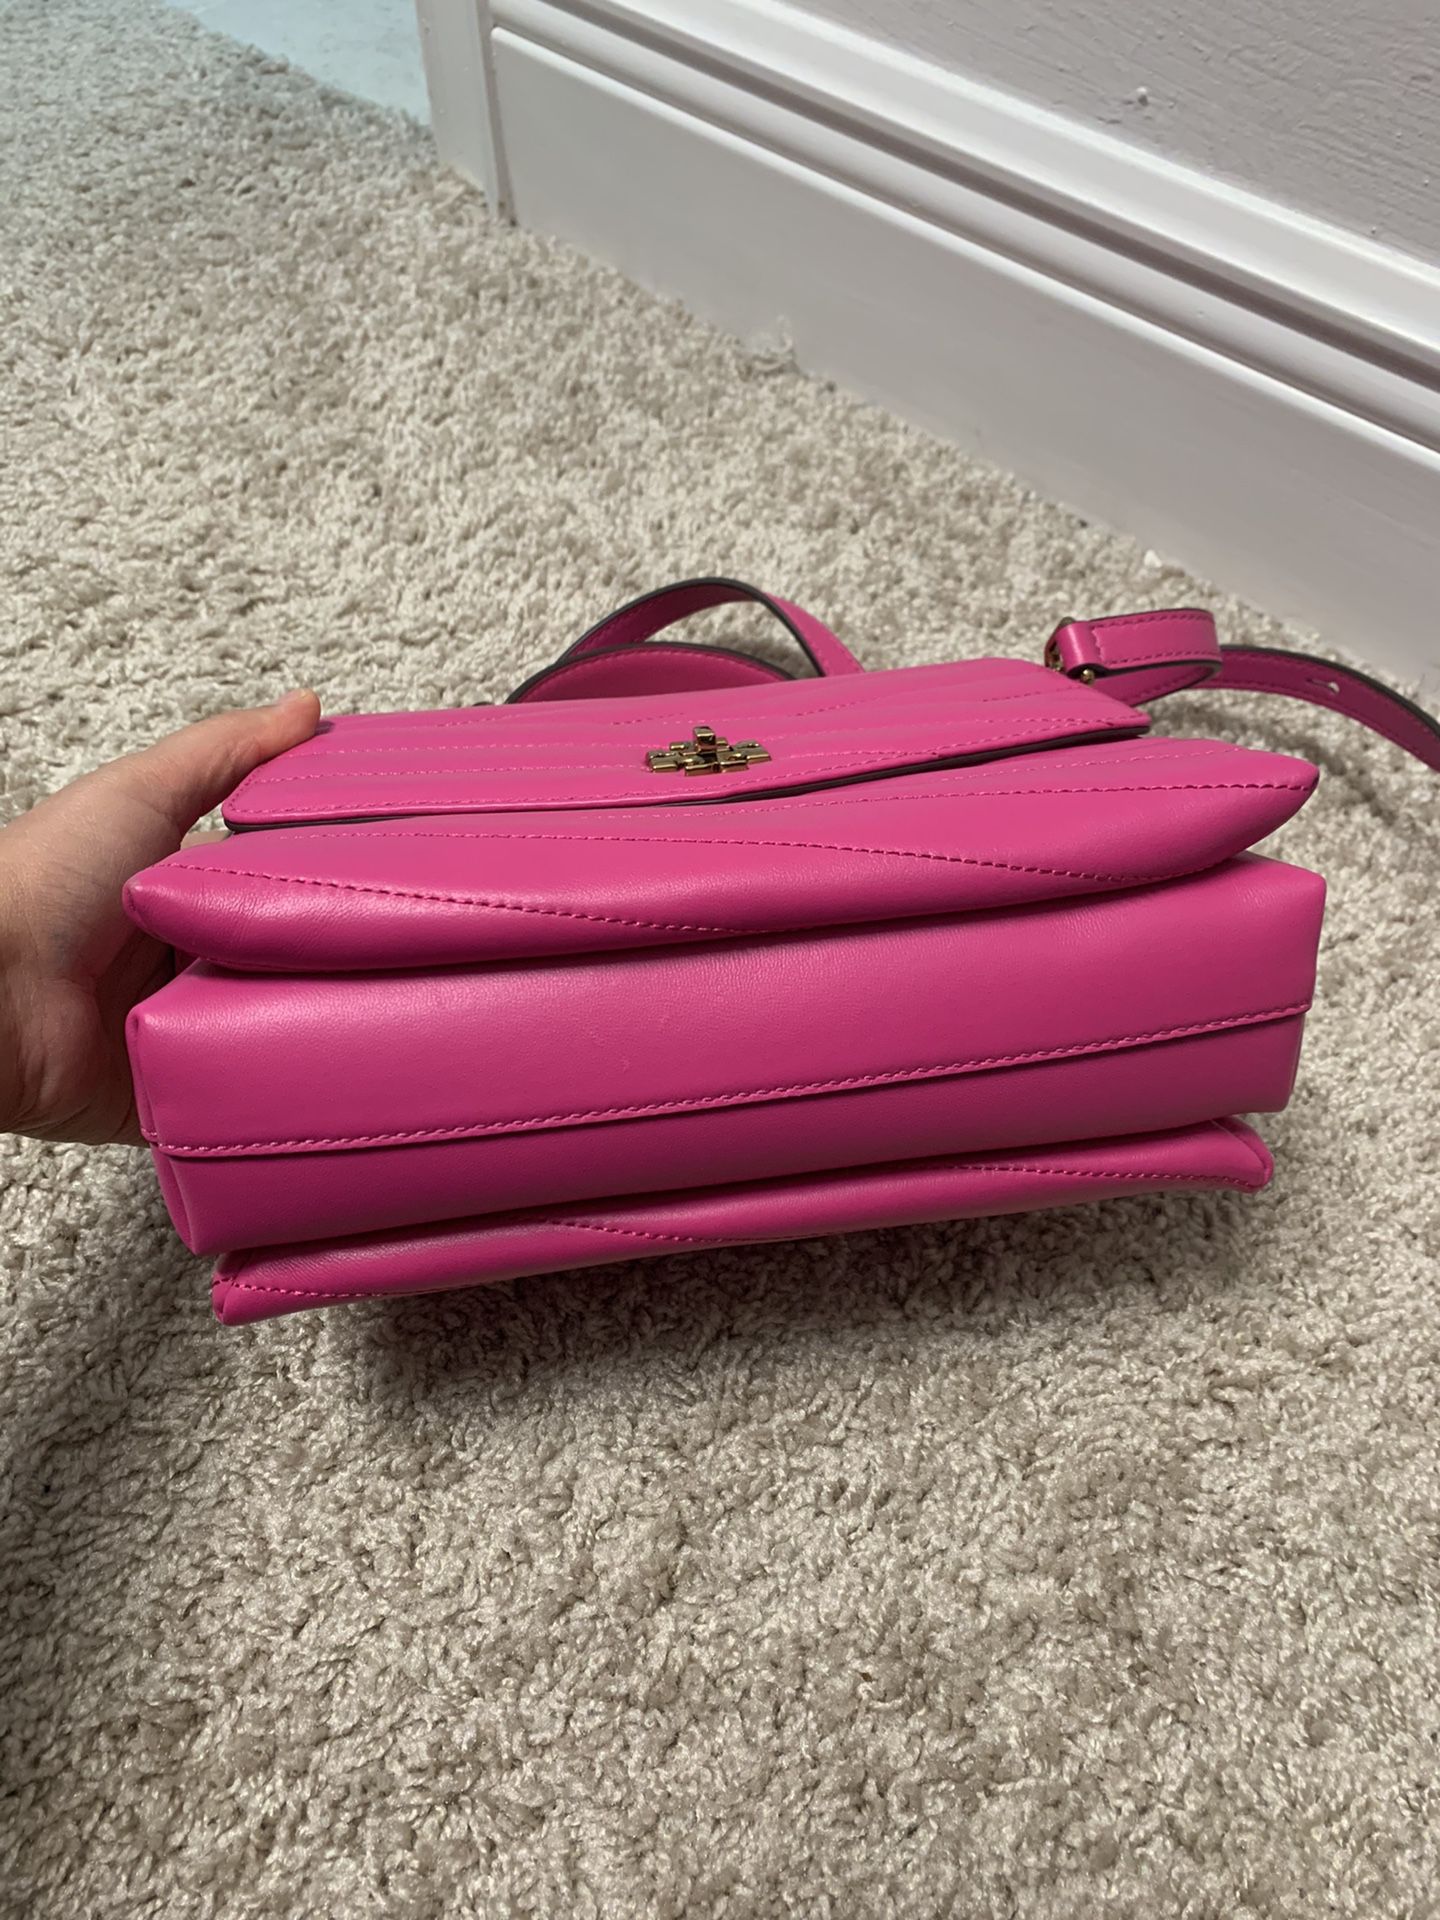 Tory Burch Kira Chevron Bag,crazy Pink,comes With The Dust Bag for Sale in  Naples, FL - OfferUp